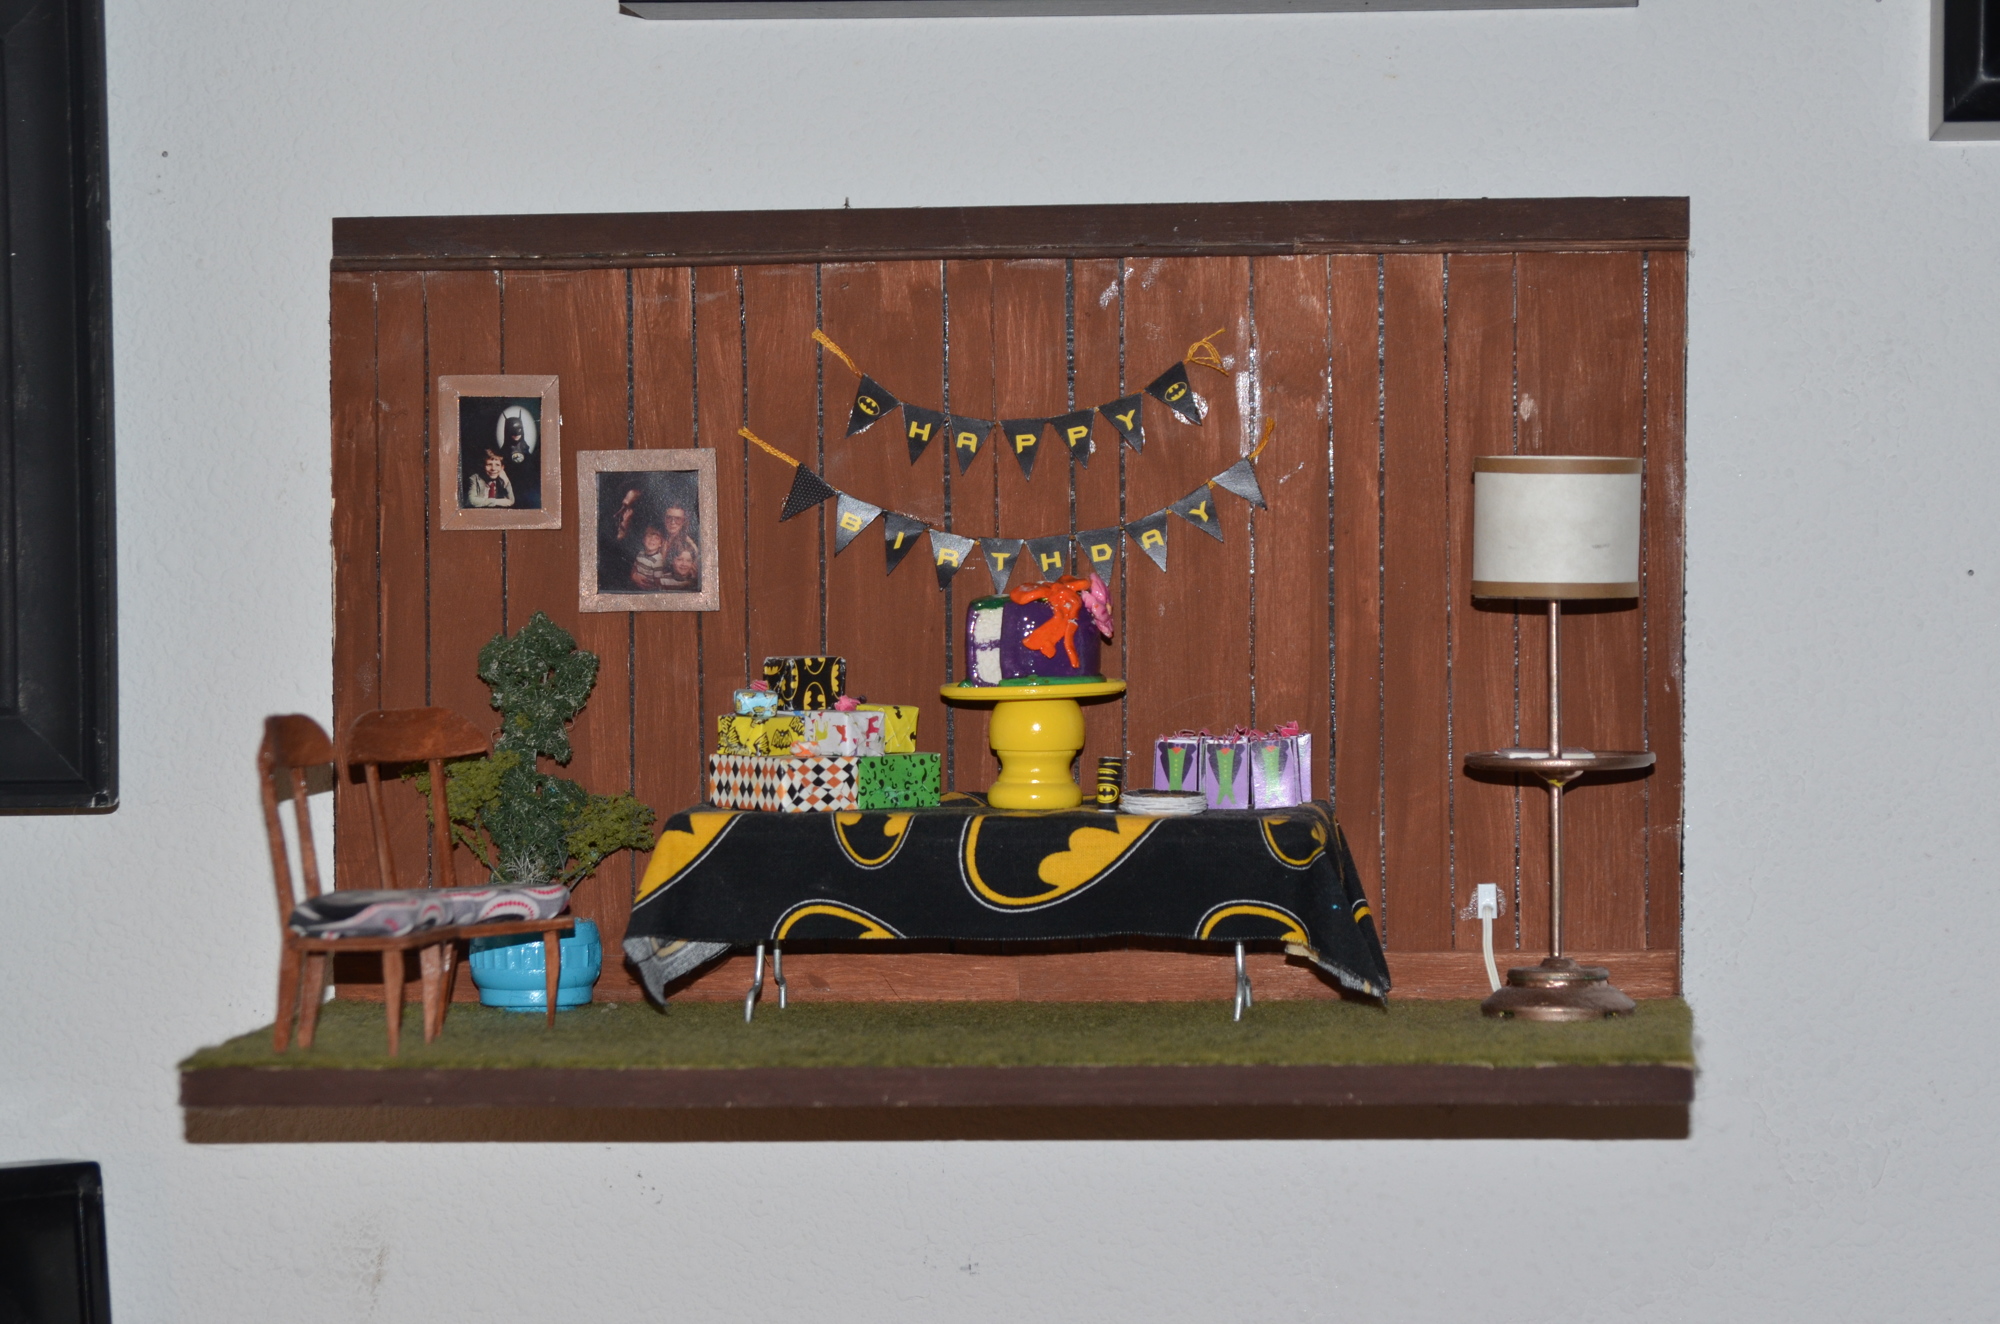 As the story in this miniature goes, a boy invited nine guests to his birthday party, and they all showed up with gifts. Details include the family portrait on the wood-paneling wall and Grandma’s glasses and cards on the side table.